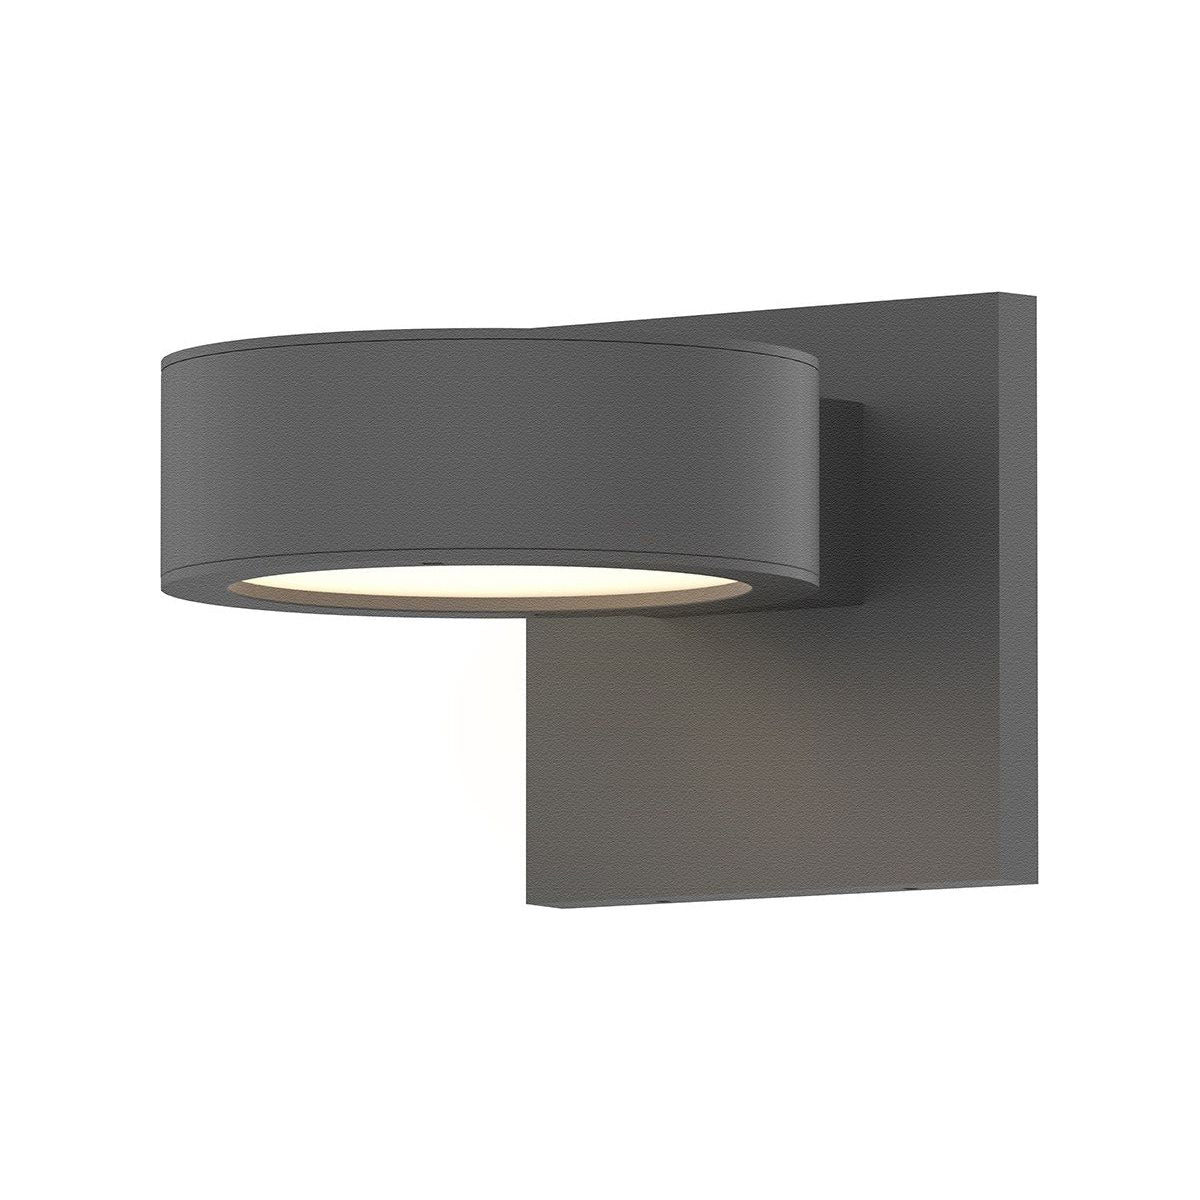 REALS Downlight LED Sconce with Plate Cap and Plate Lens